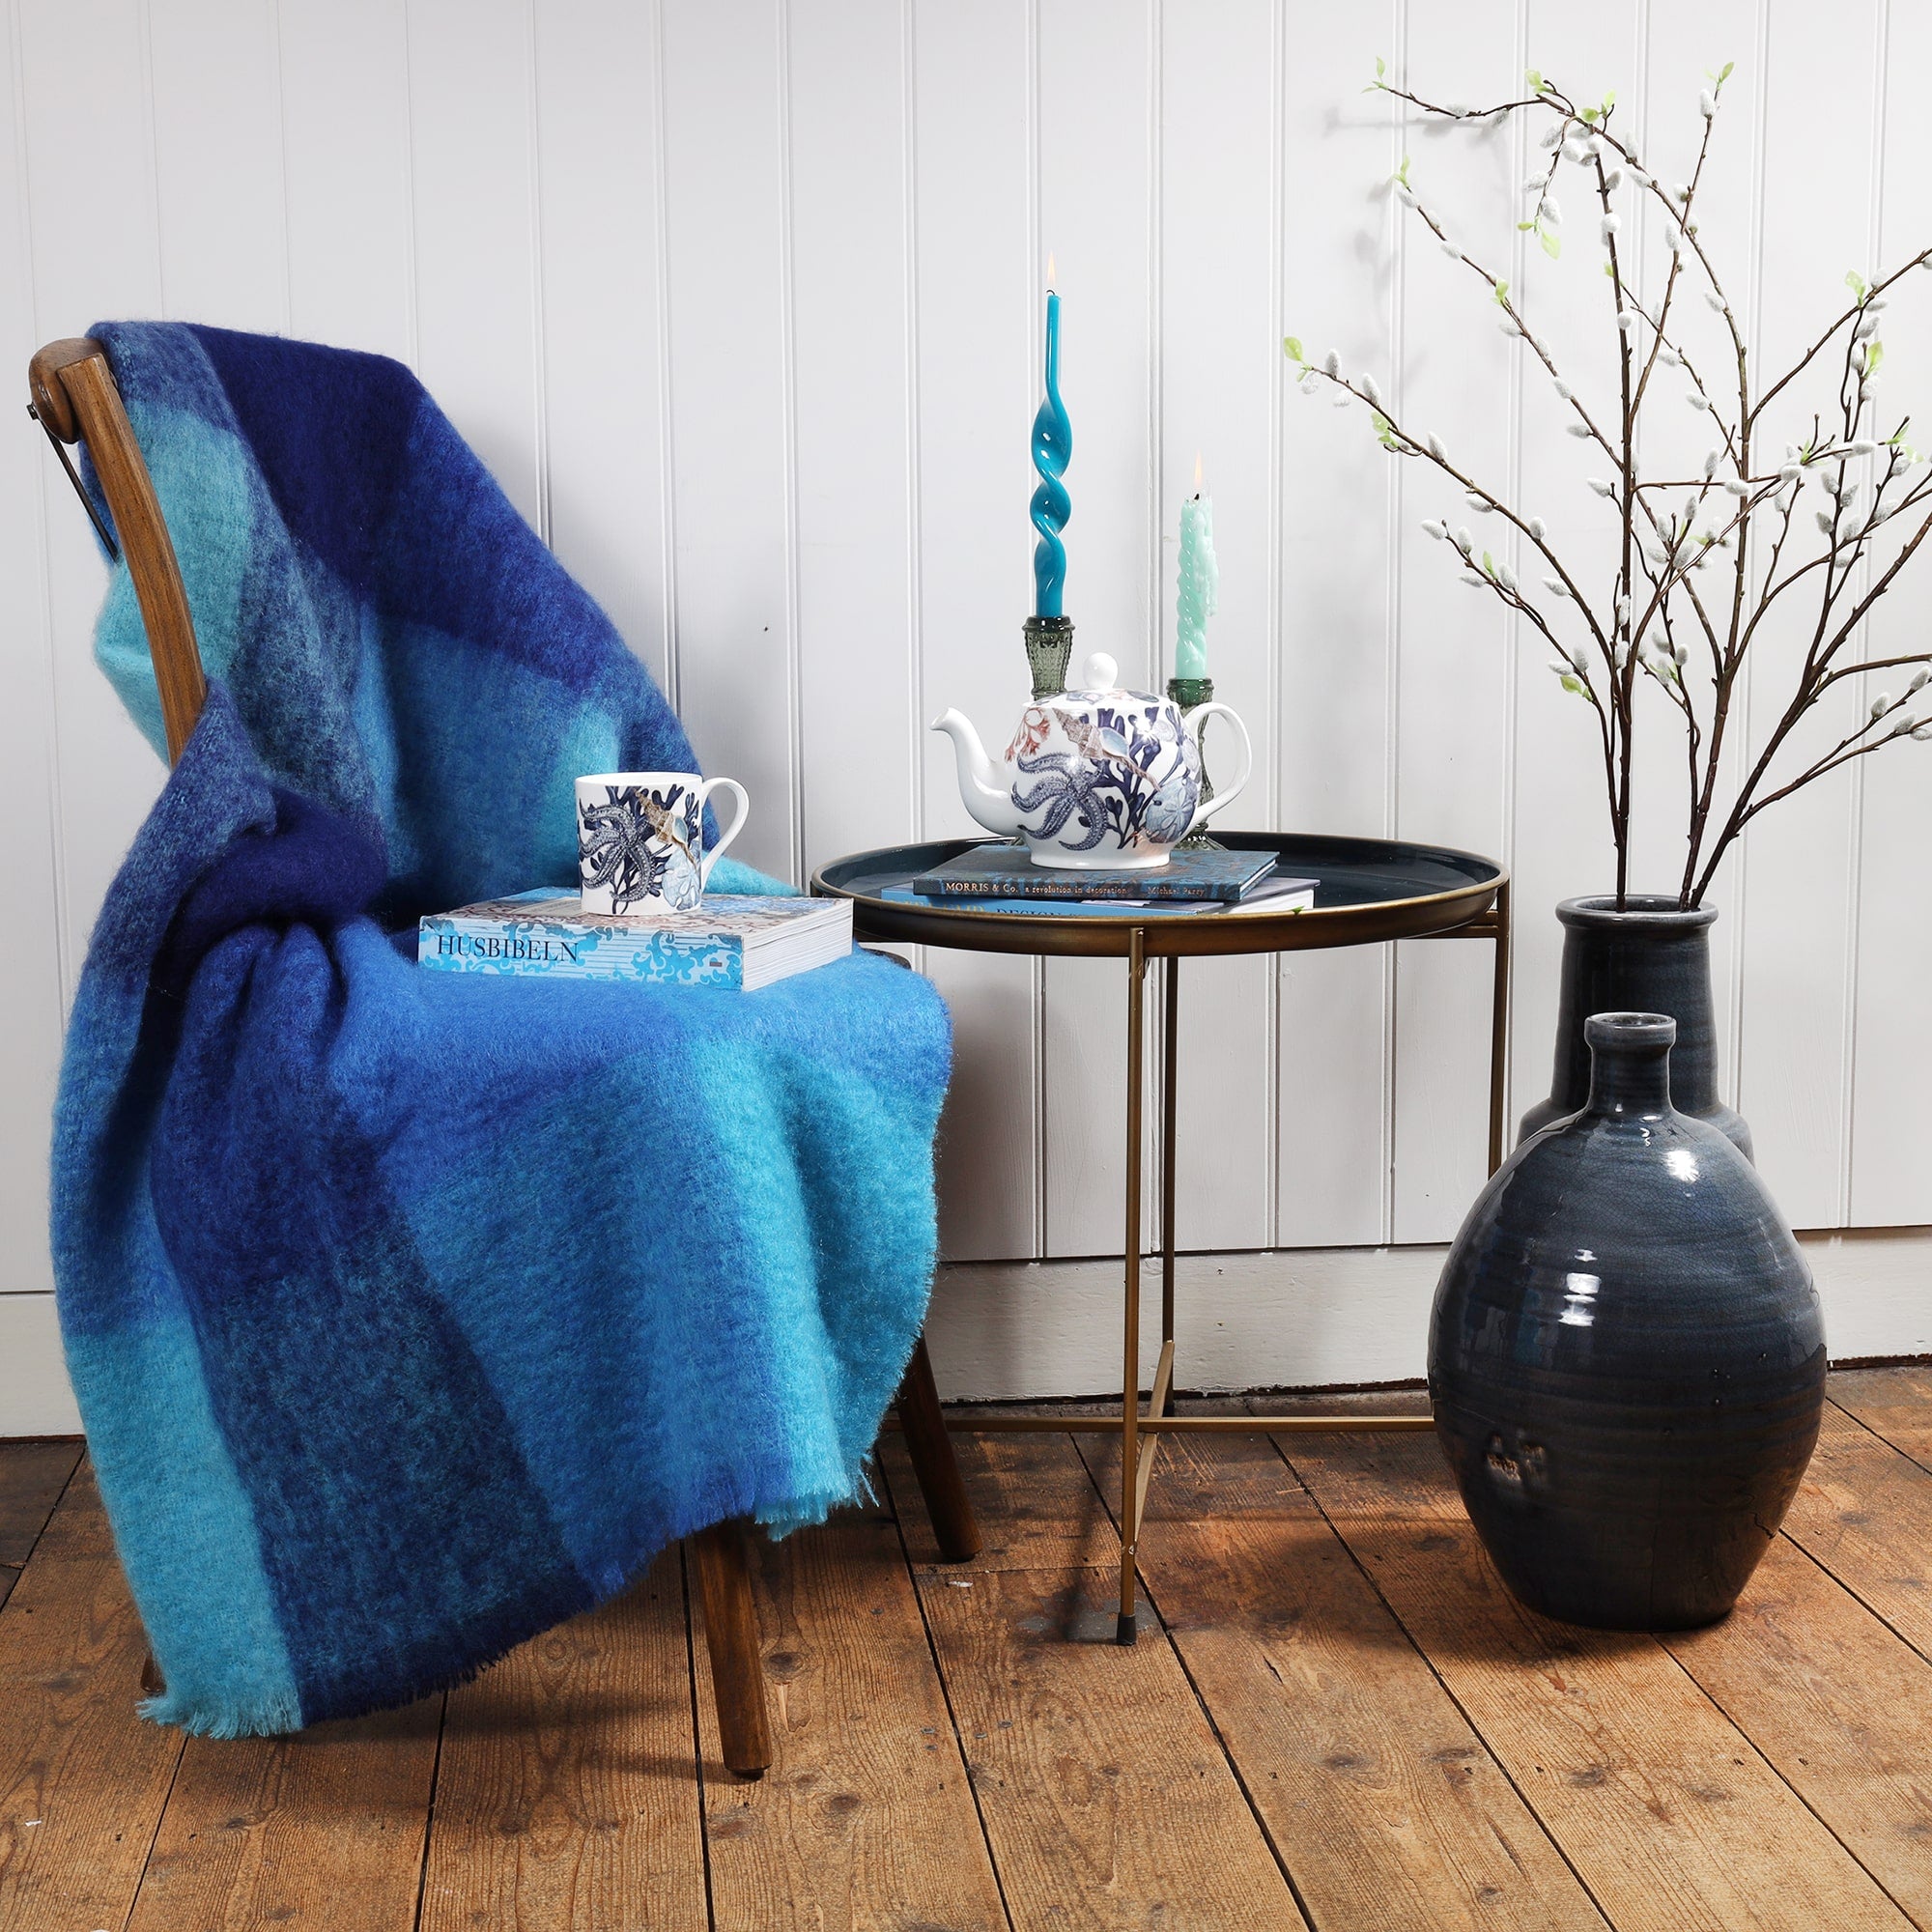 Mohair in Aqua Blue Check throw draped over a chair.Placed on the chair is a book and a mug in Beachcomber design,next to the chair is a table with books and a beachcomber Teapot and candles and candle holders.Next to the table are large navy vases with catkins coming out of the